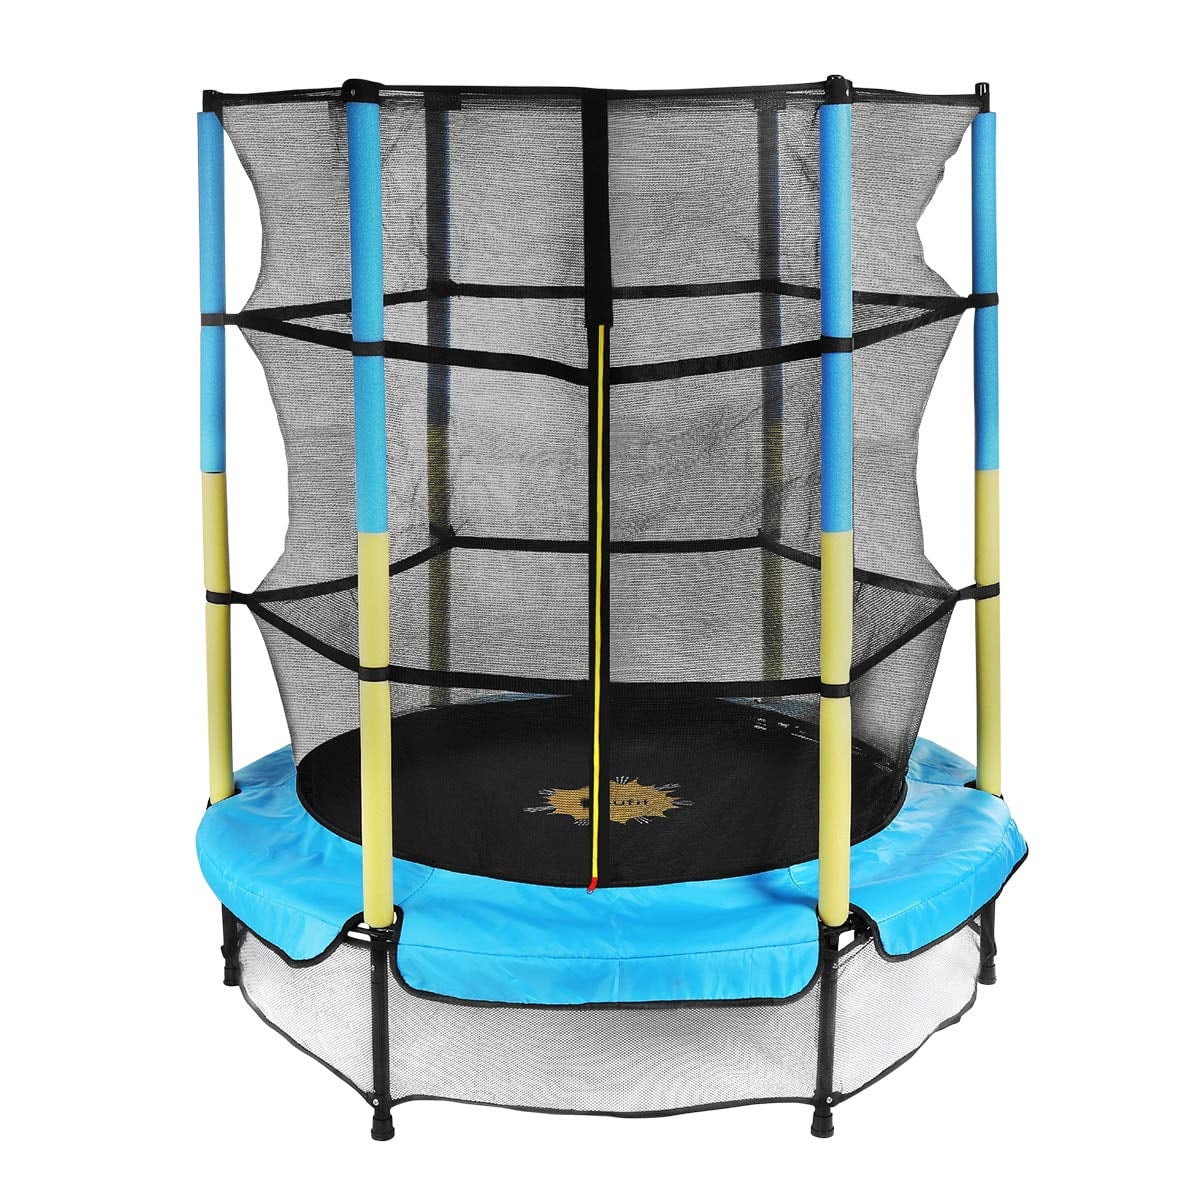 55 Inch Kids Toddler Trampoline with Mesh Enclosure,Child Fitness Exercise Jumping Round Trampoline Bed for Outdoor Indoor